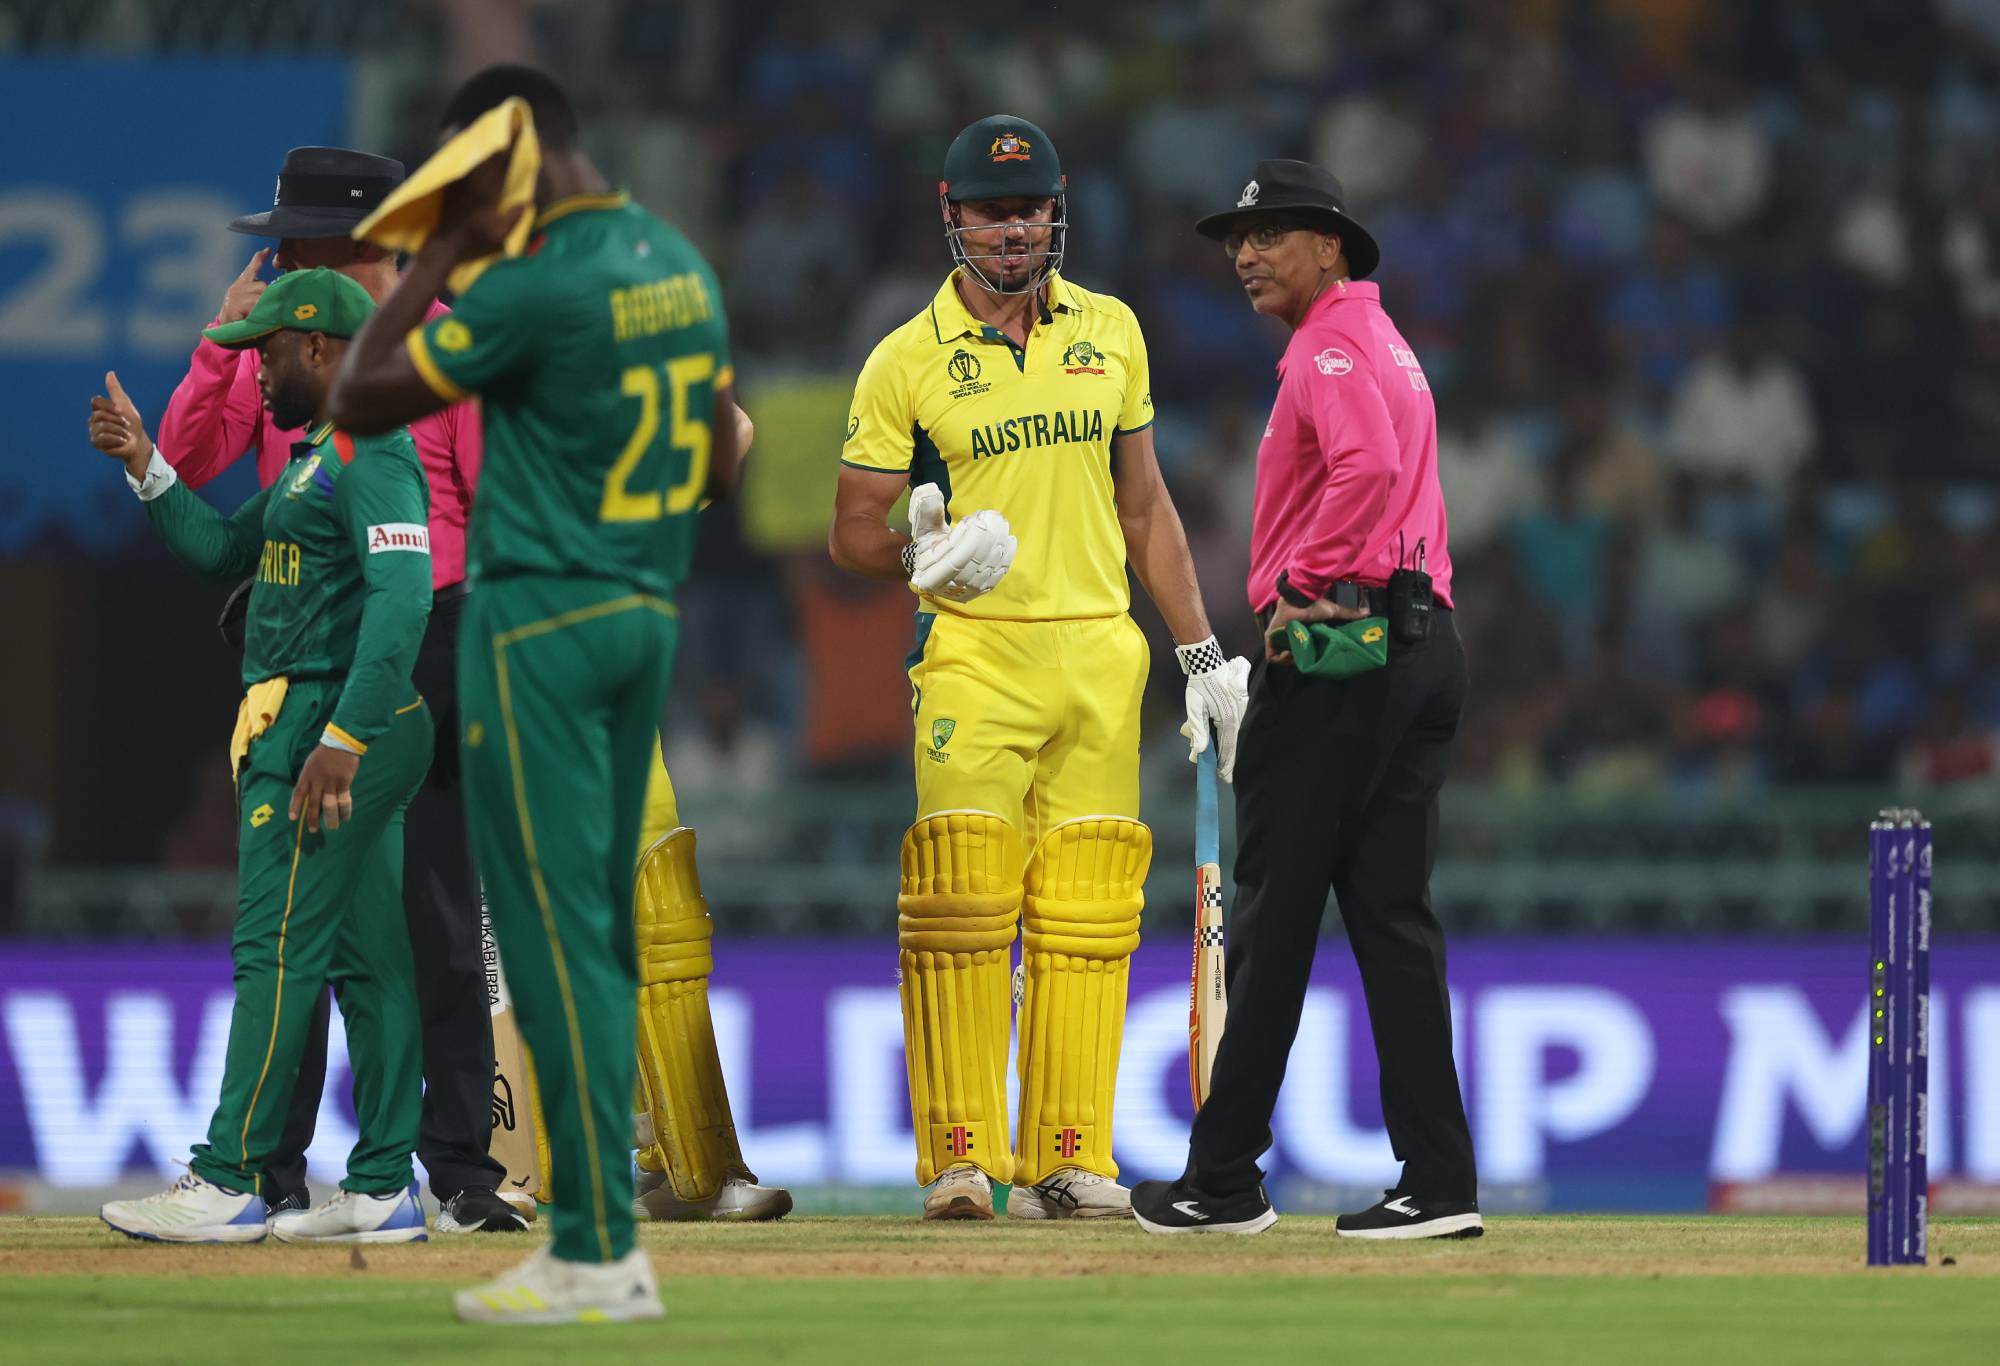 LUCKNOW, INDIA - OCTOBER 12: Marcus Stoinis of Australia interacts with Match Umpire Joel Wilson after being dismissed from a review during the ICC Men's Cricket World Cup India 2023 between Australia and South Africa at BRSABVE Cricket Stadium on October 12, 2023 in Lucknow, India. (Photo by Matthew Lewis-ICC/ICC via Getty Images)